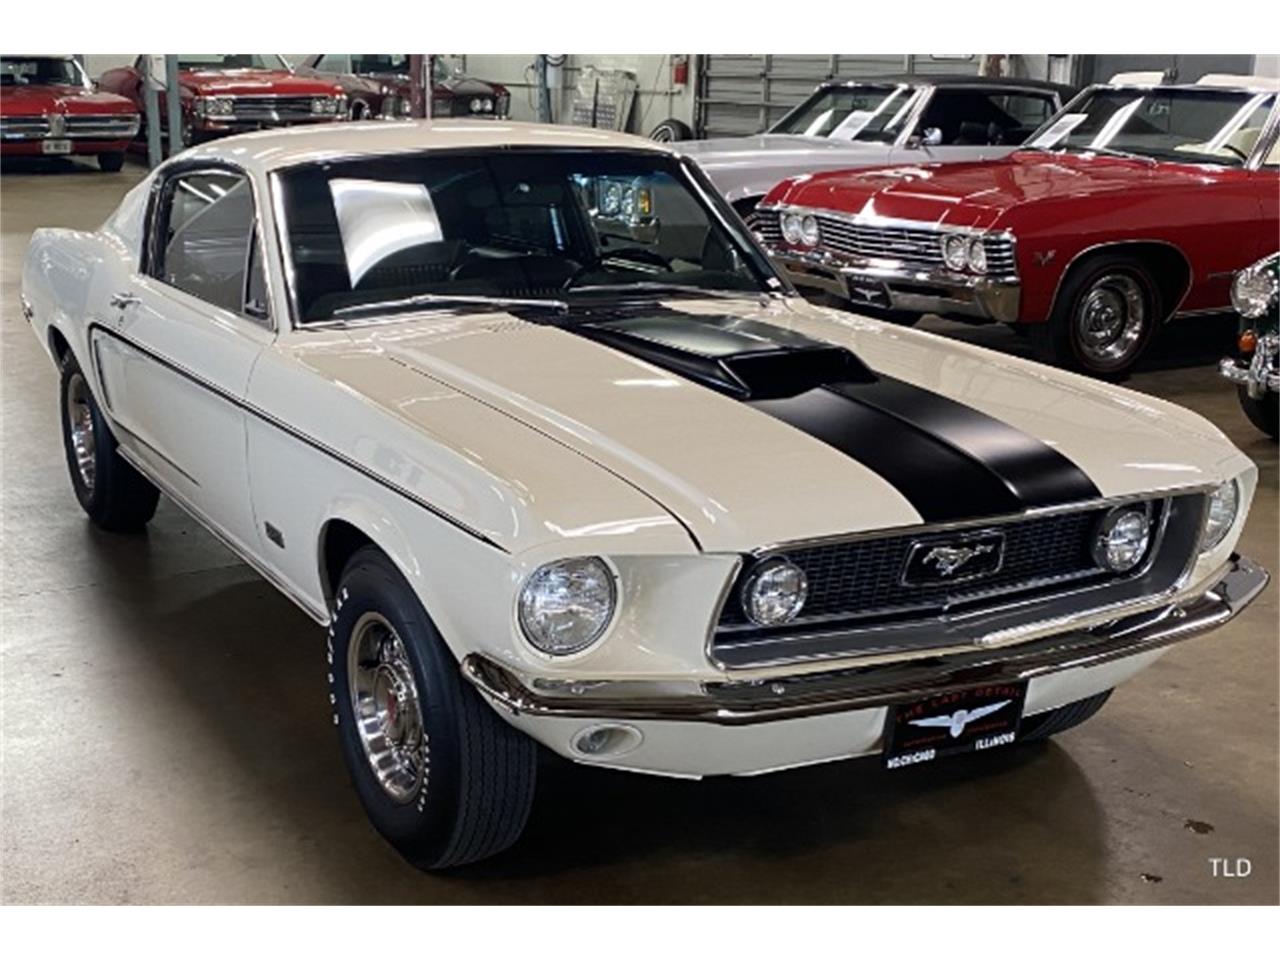 For Sale: 1968 Ford Mustang in Chicago, Illinois for sale in Chicago, IL